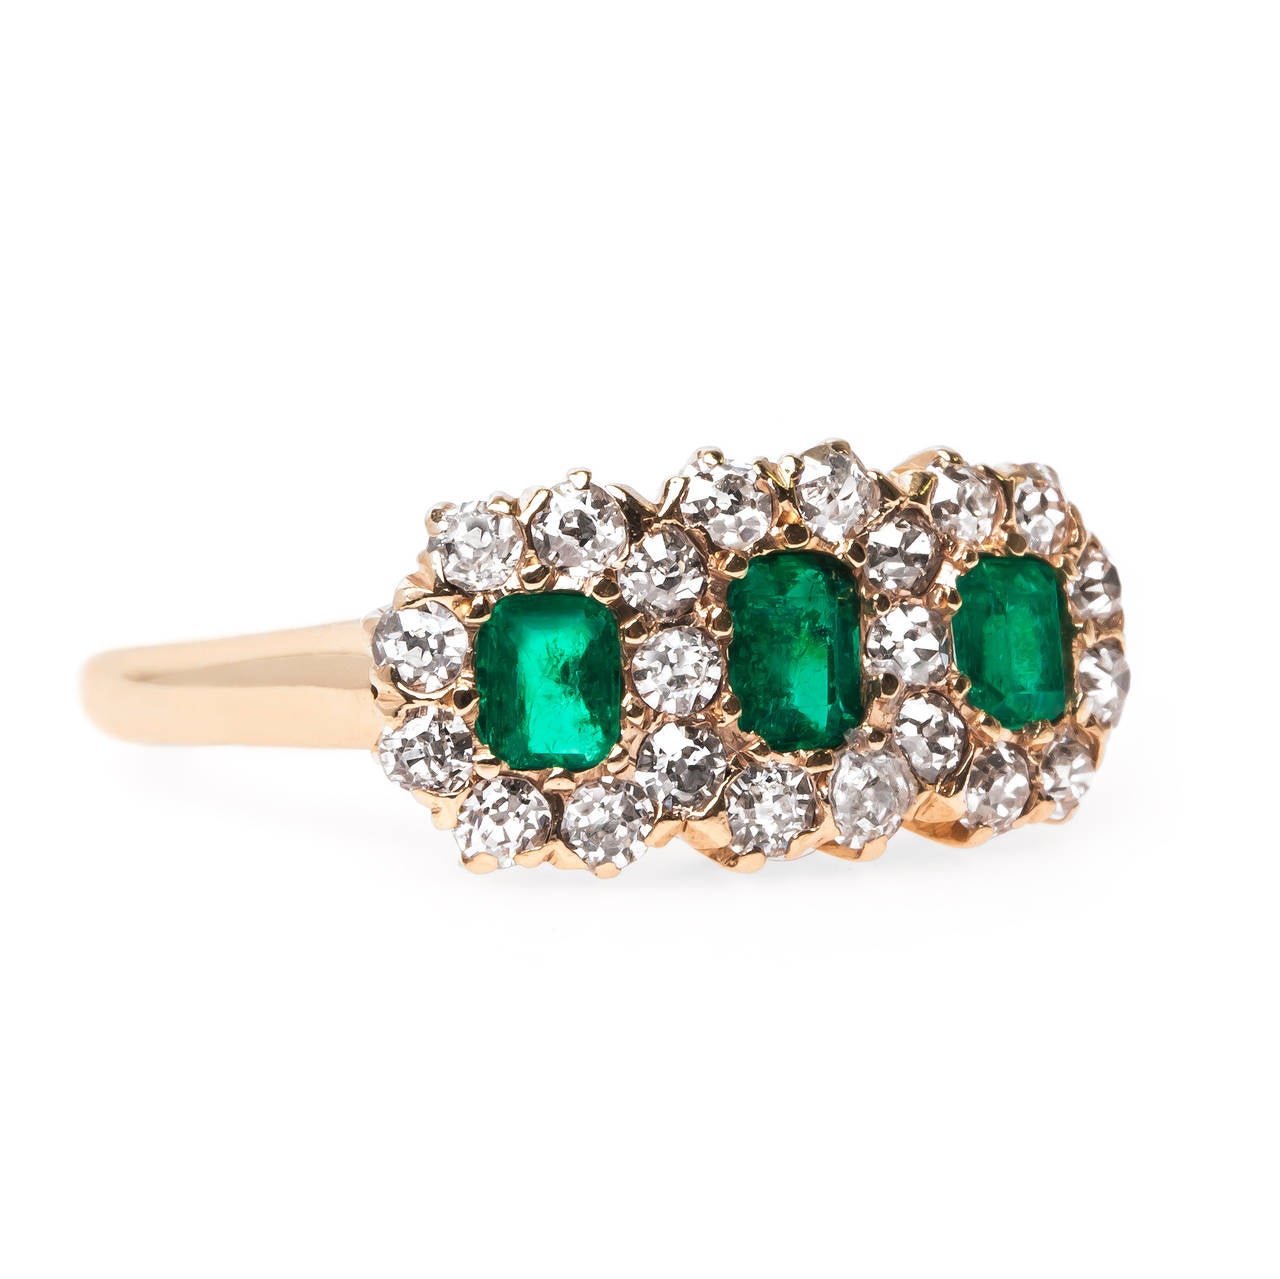 Columbus Circle is a dramatic Late Victorian (circa 1900) 14k yellow gold ring centering three intensely saturated natural Rectangular Step-Cut emeralds totaling approximately 0.55ct total weight. The emeralds are slightly abraded on the top due to